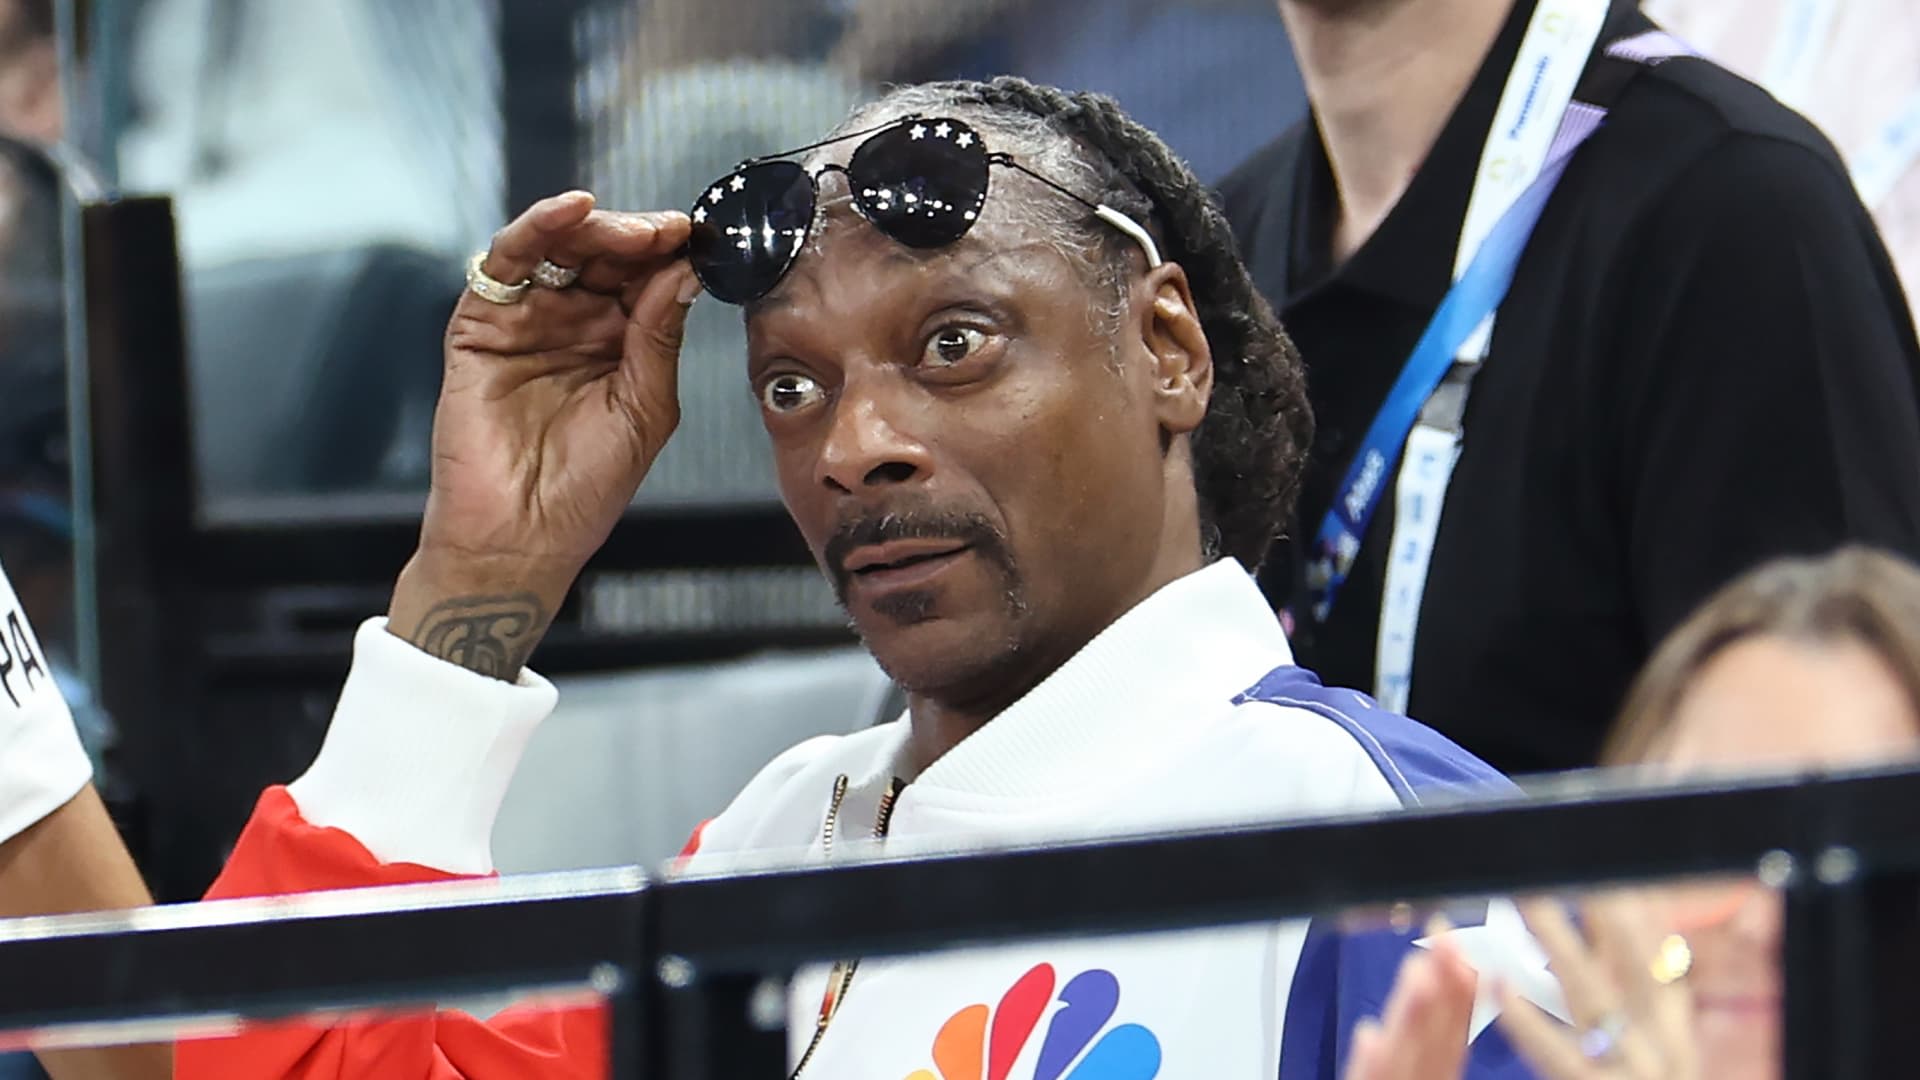 Summer Olympics viewership is up — and Snoop Dogg is part of the buzz